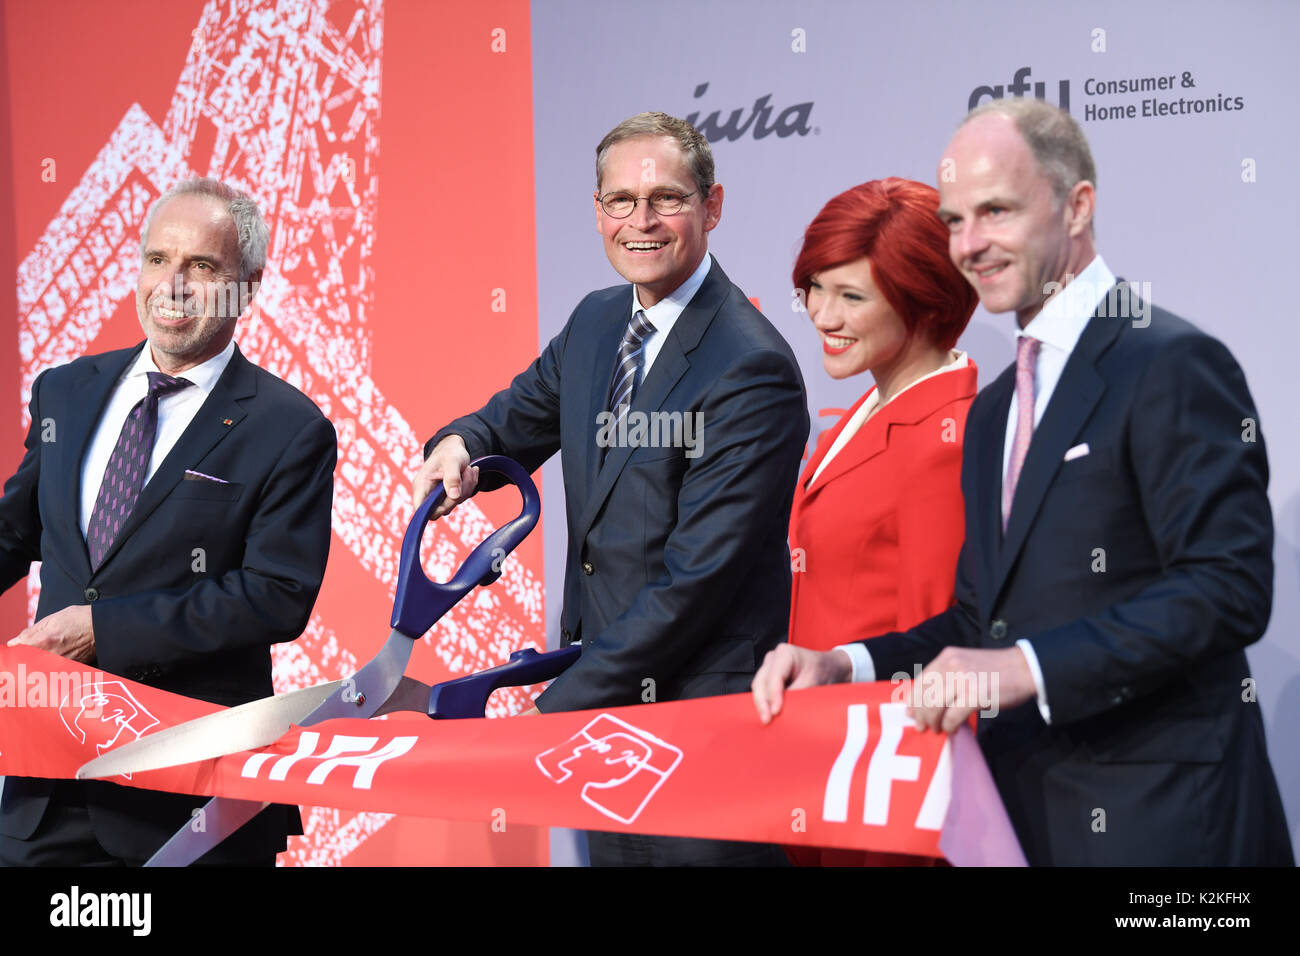 Berlin, Germany. 31st Aug, 2017. Hans-Joachim Kamp (L-R), chief of the supervisory board of the gfu Consumer & Home Electronics GmbH, Berlin's mayor Michael Mueller (SPD), Miss IFA and Christian Goeke, chairman of the board of the Berlin fair open the the IFA 2017 industrial exhibition at the opening gala in Berlin, Germany, 31 August 2017. Photo: Jens Kalaene/dpa-Zentralbild/dpa/Alamy Live News Stock Photo